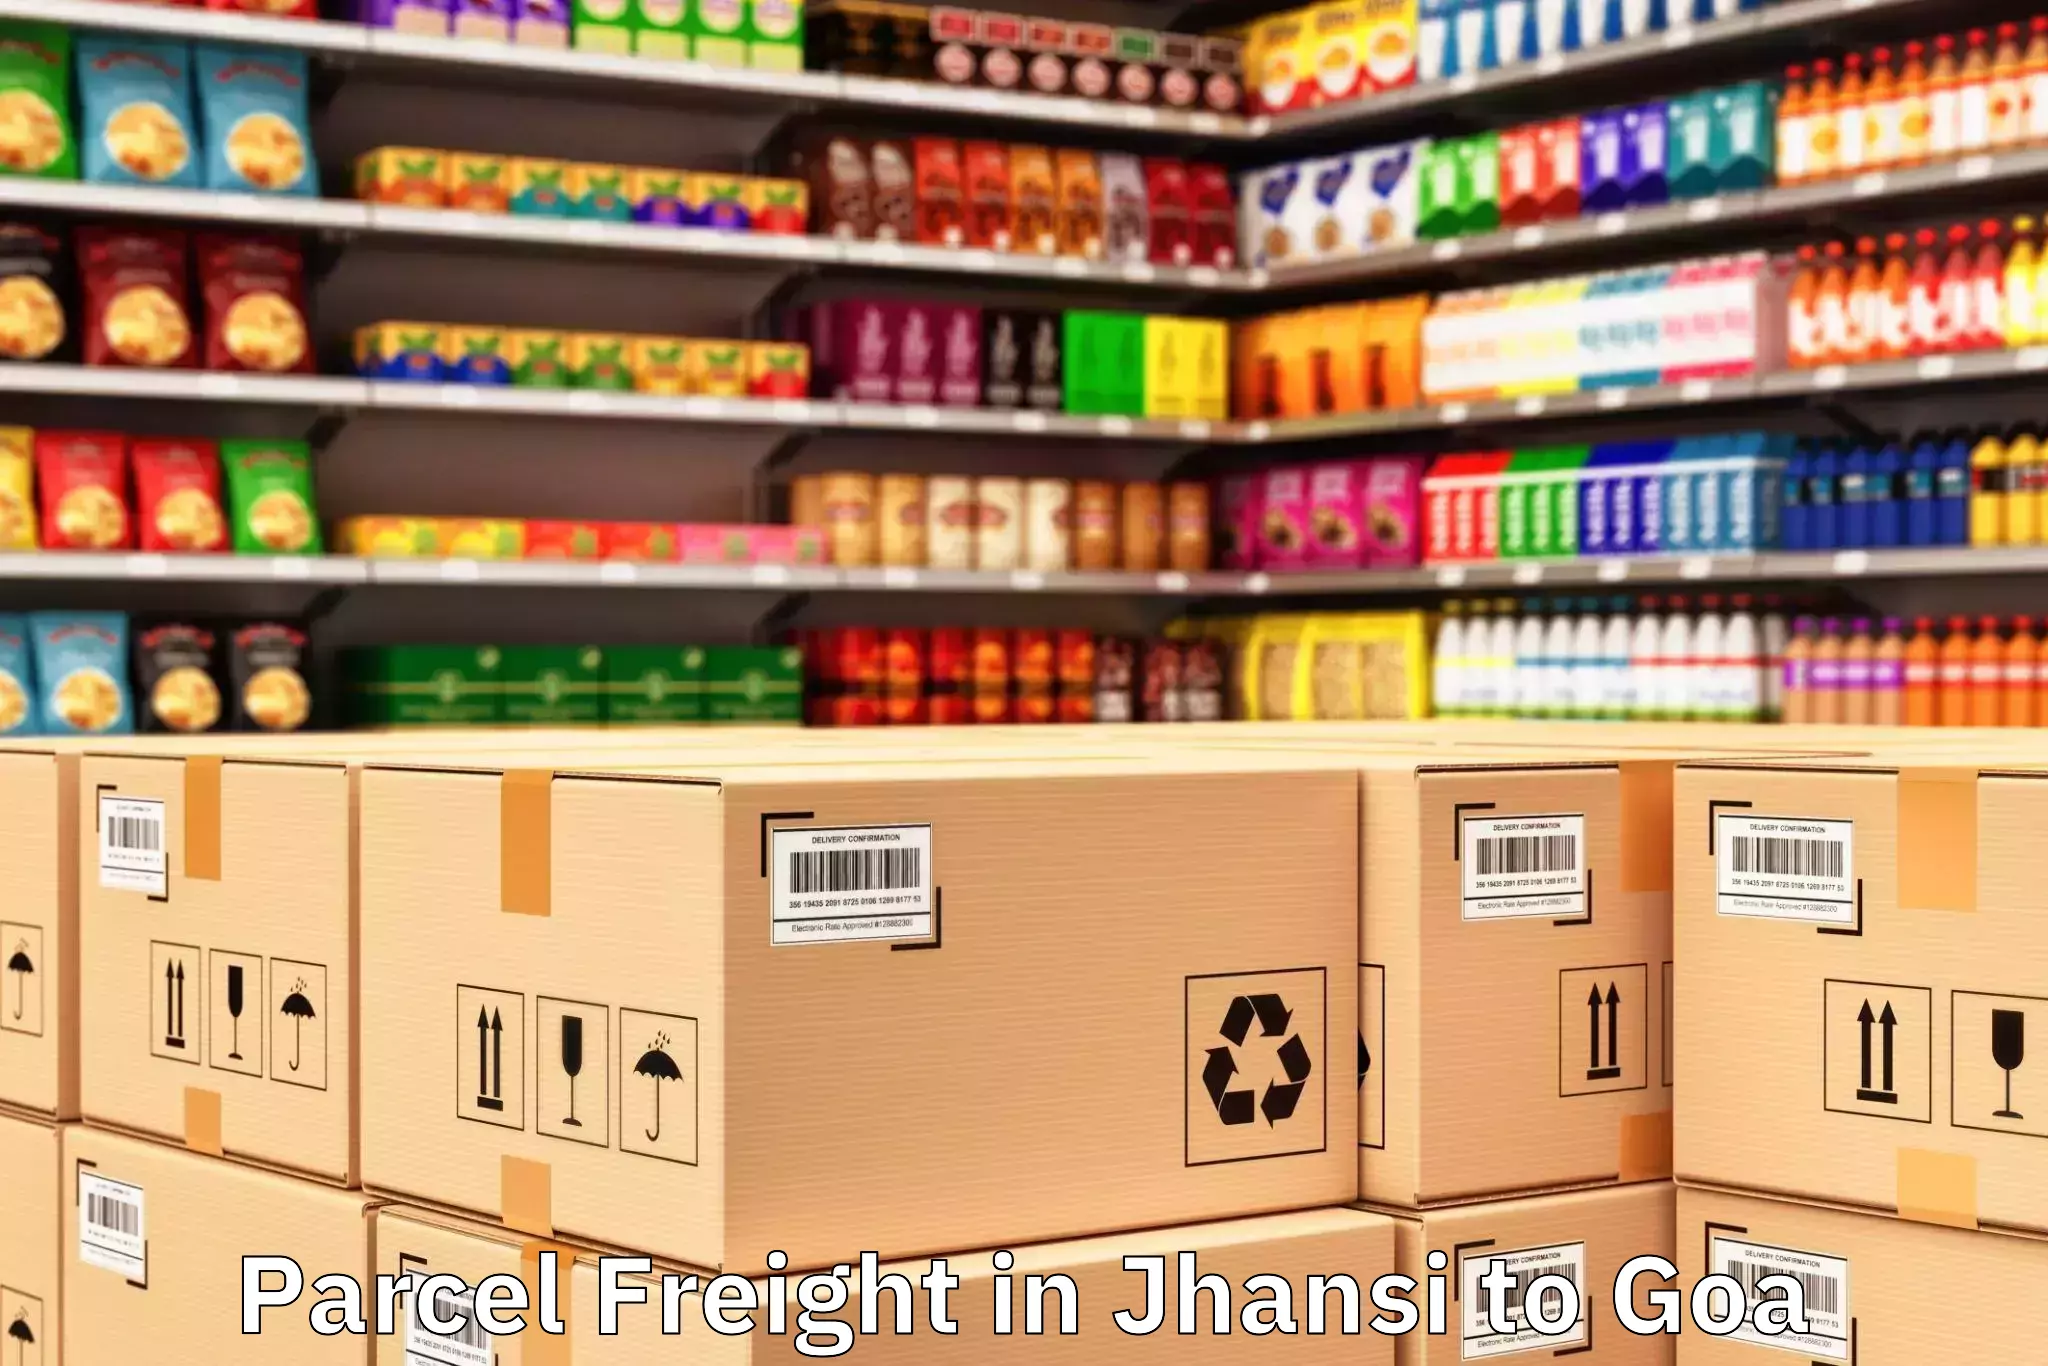 Top Jhansi to Mall De Goa Parcel Freight Available